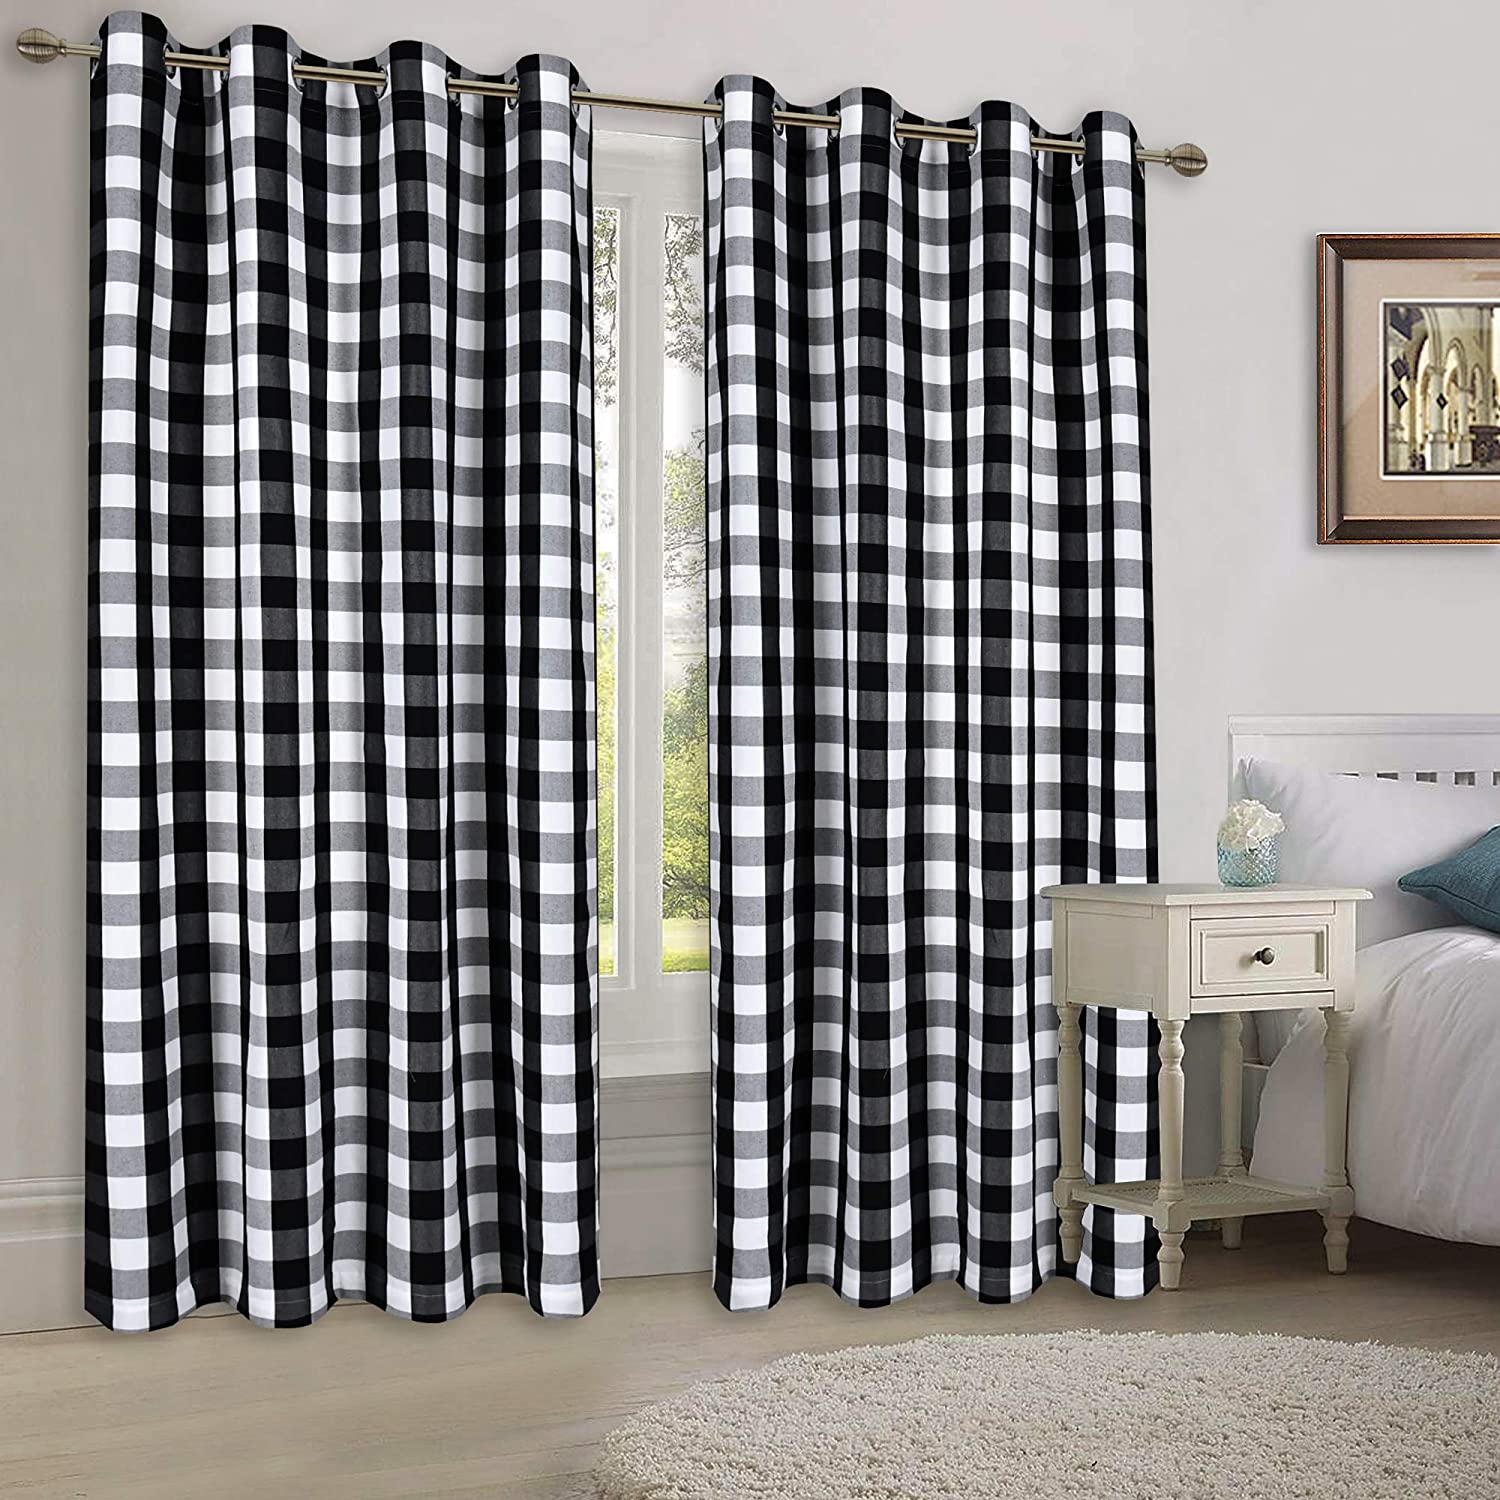 Black and White Buffalo Checker Plaid Curtains for Farmhouse Bedroom  Gingham Light Filtering Window Drapes Grommet Curtains for Living Room Set  of Panels Each is 52Wx84L